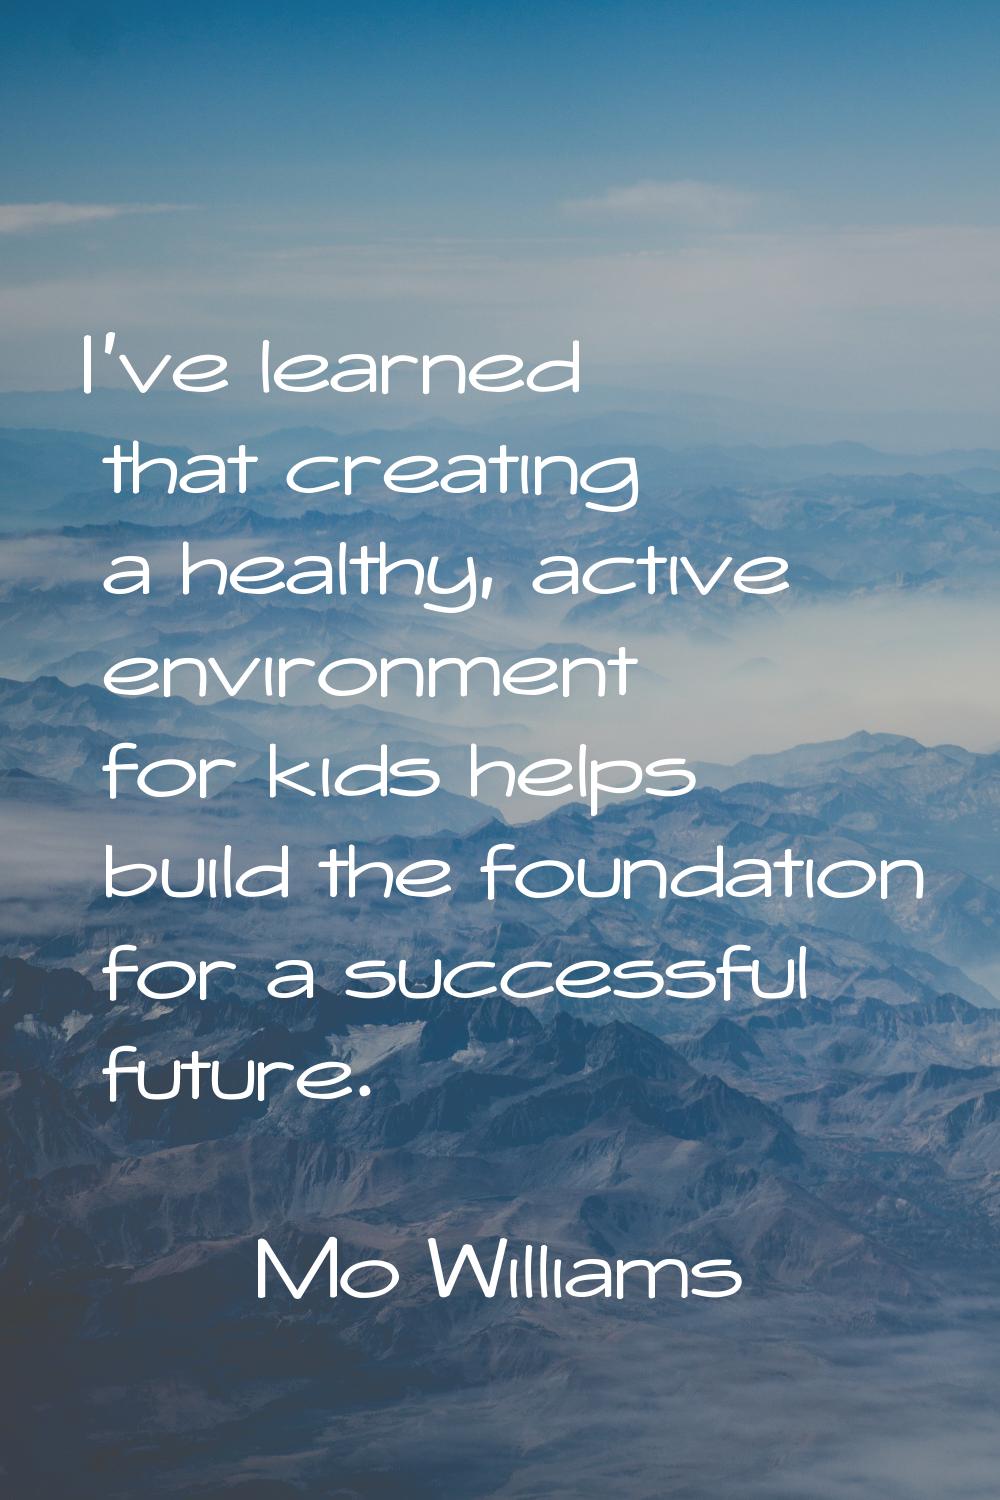 I've learned that creating a healthy, active environment for kids helps build the foundation for a 